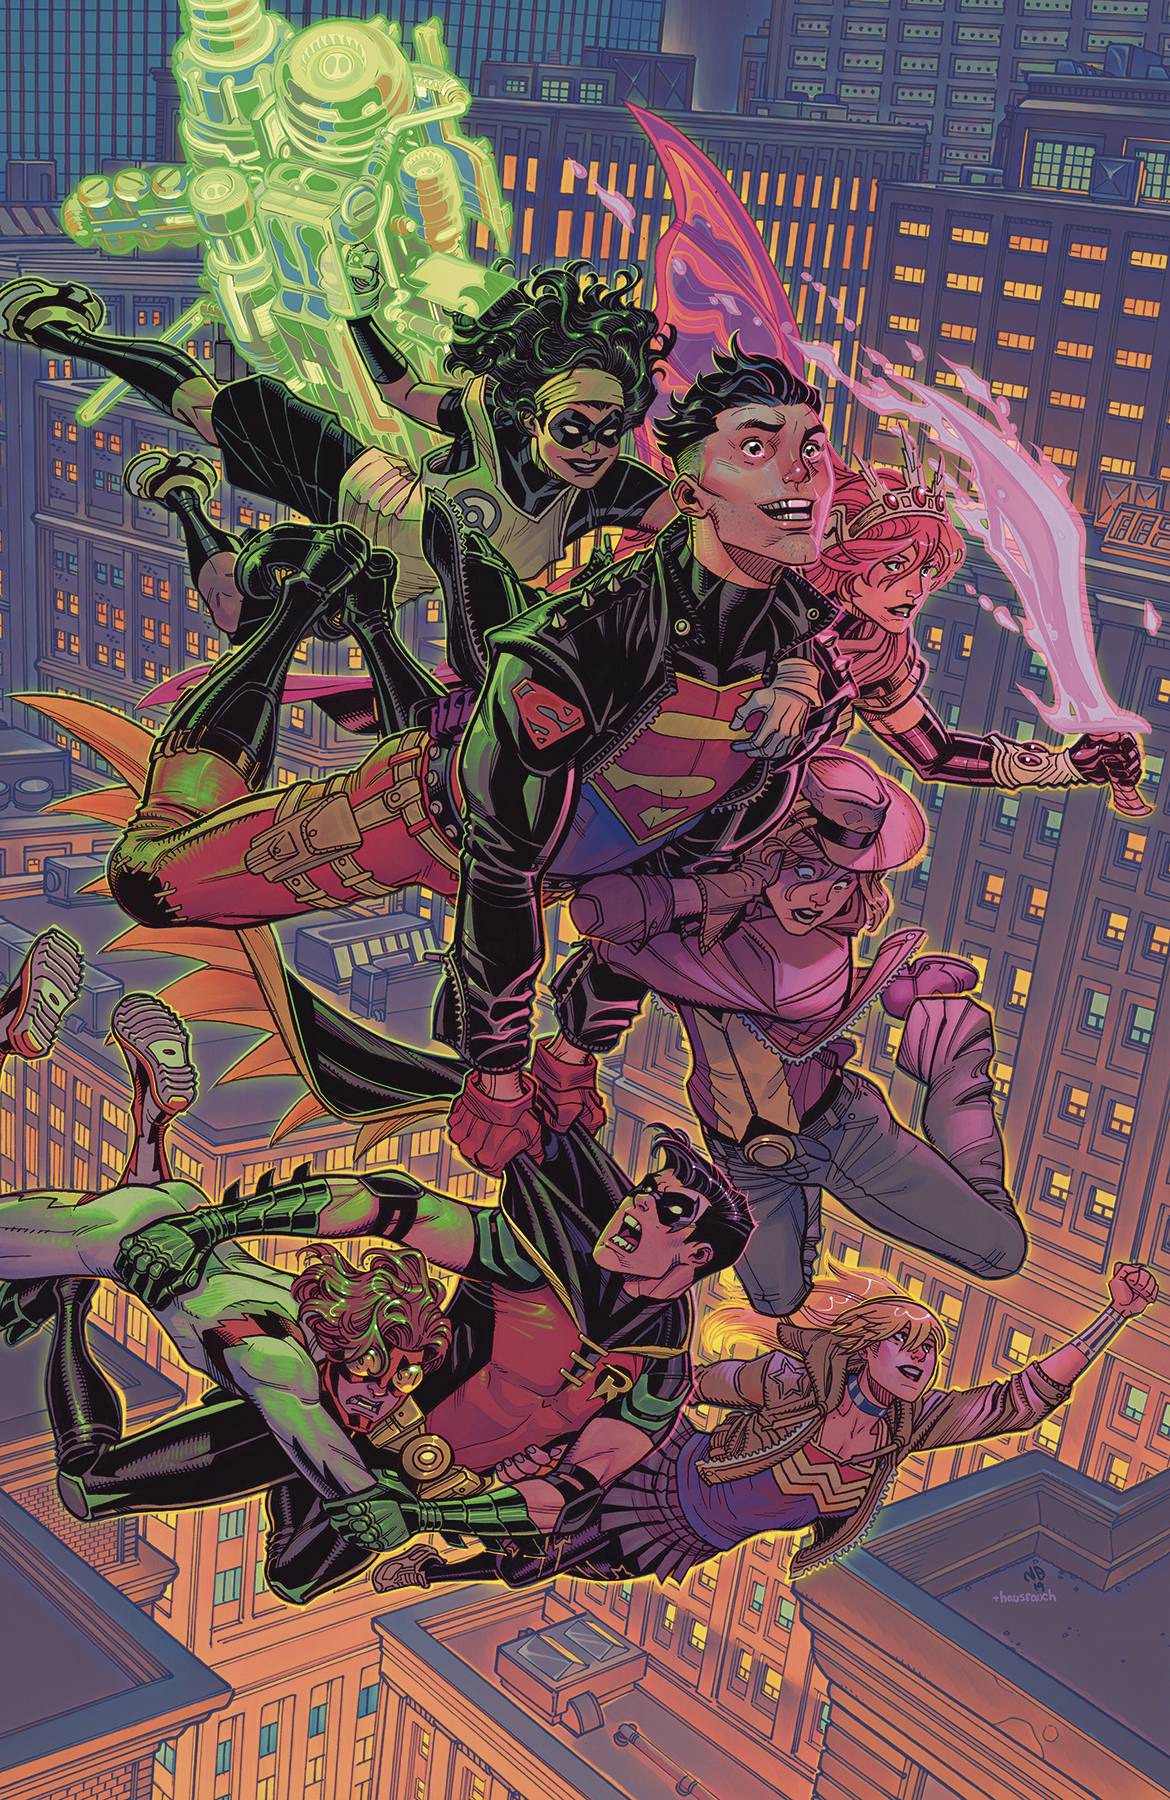 10/02/2019 YOUNG JUSTICE #9 CARD STOCK VAR ED